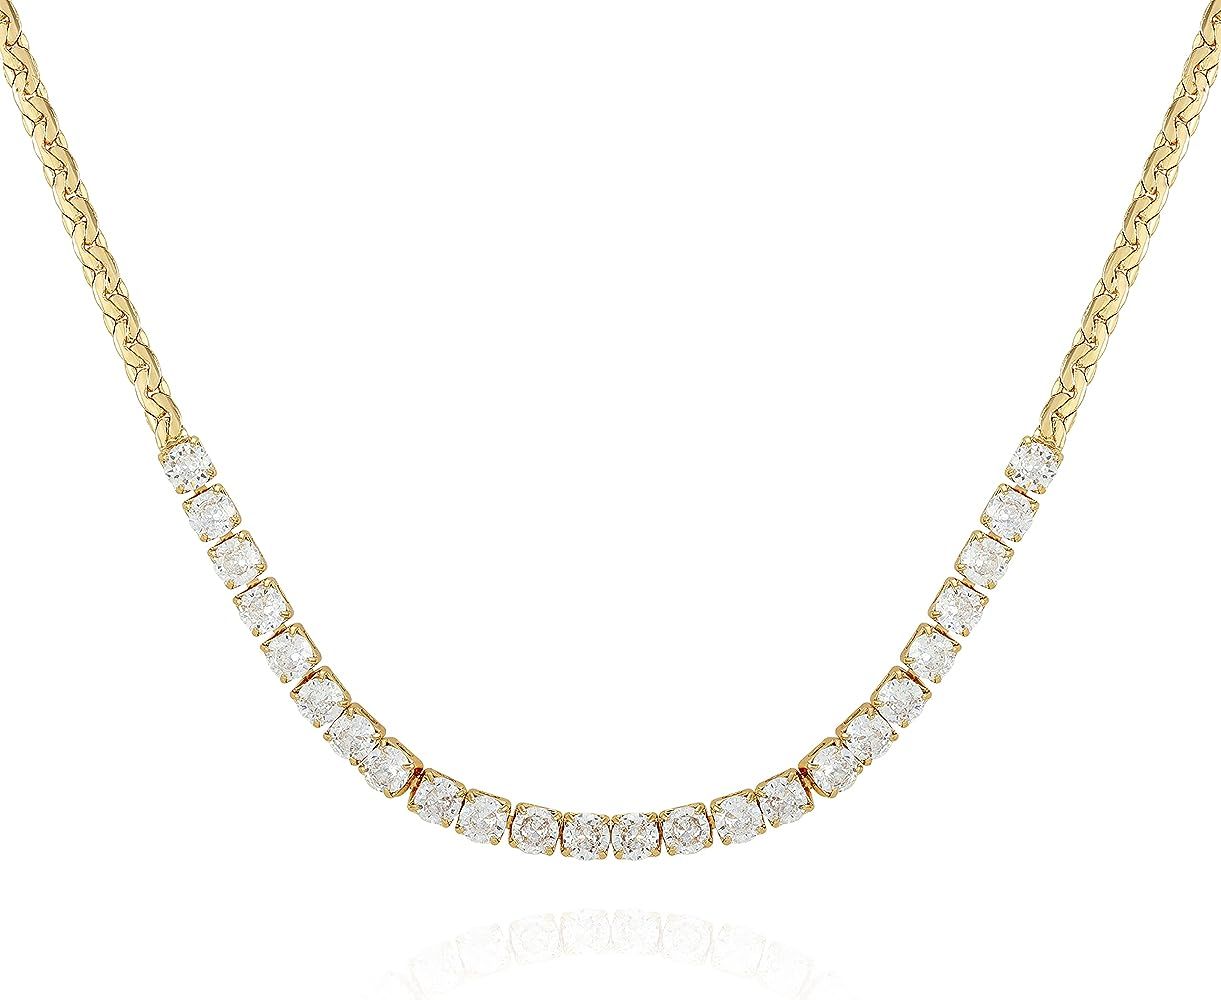 Vince Camuto Gold Tone Chain Necklace with Crystal Rhinestones, 18" | Amazon (US)